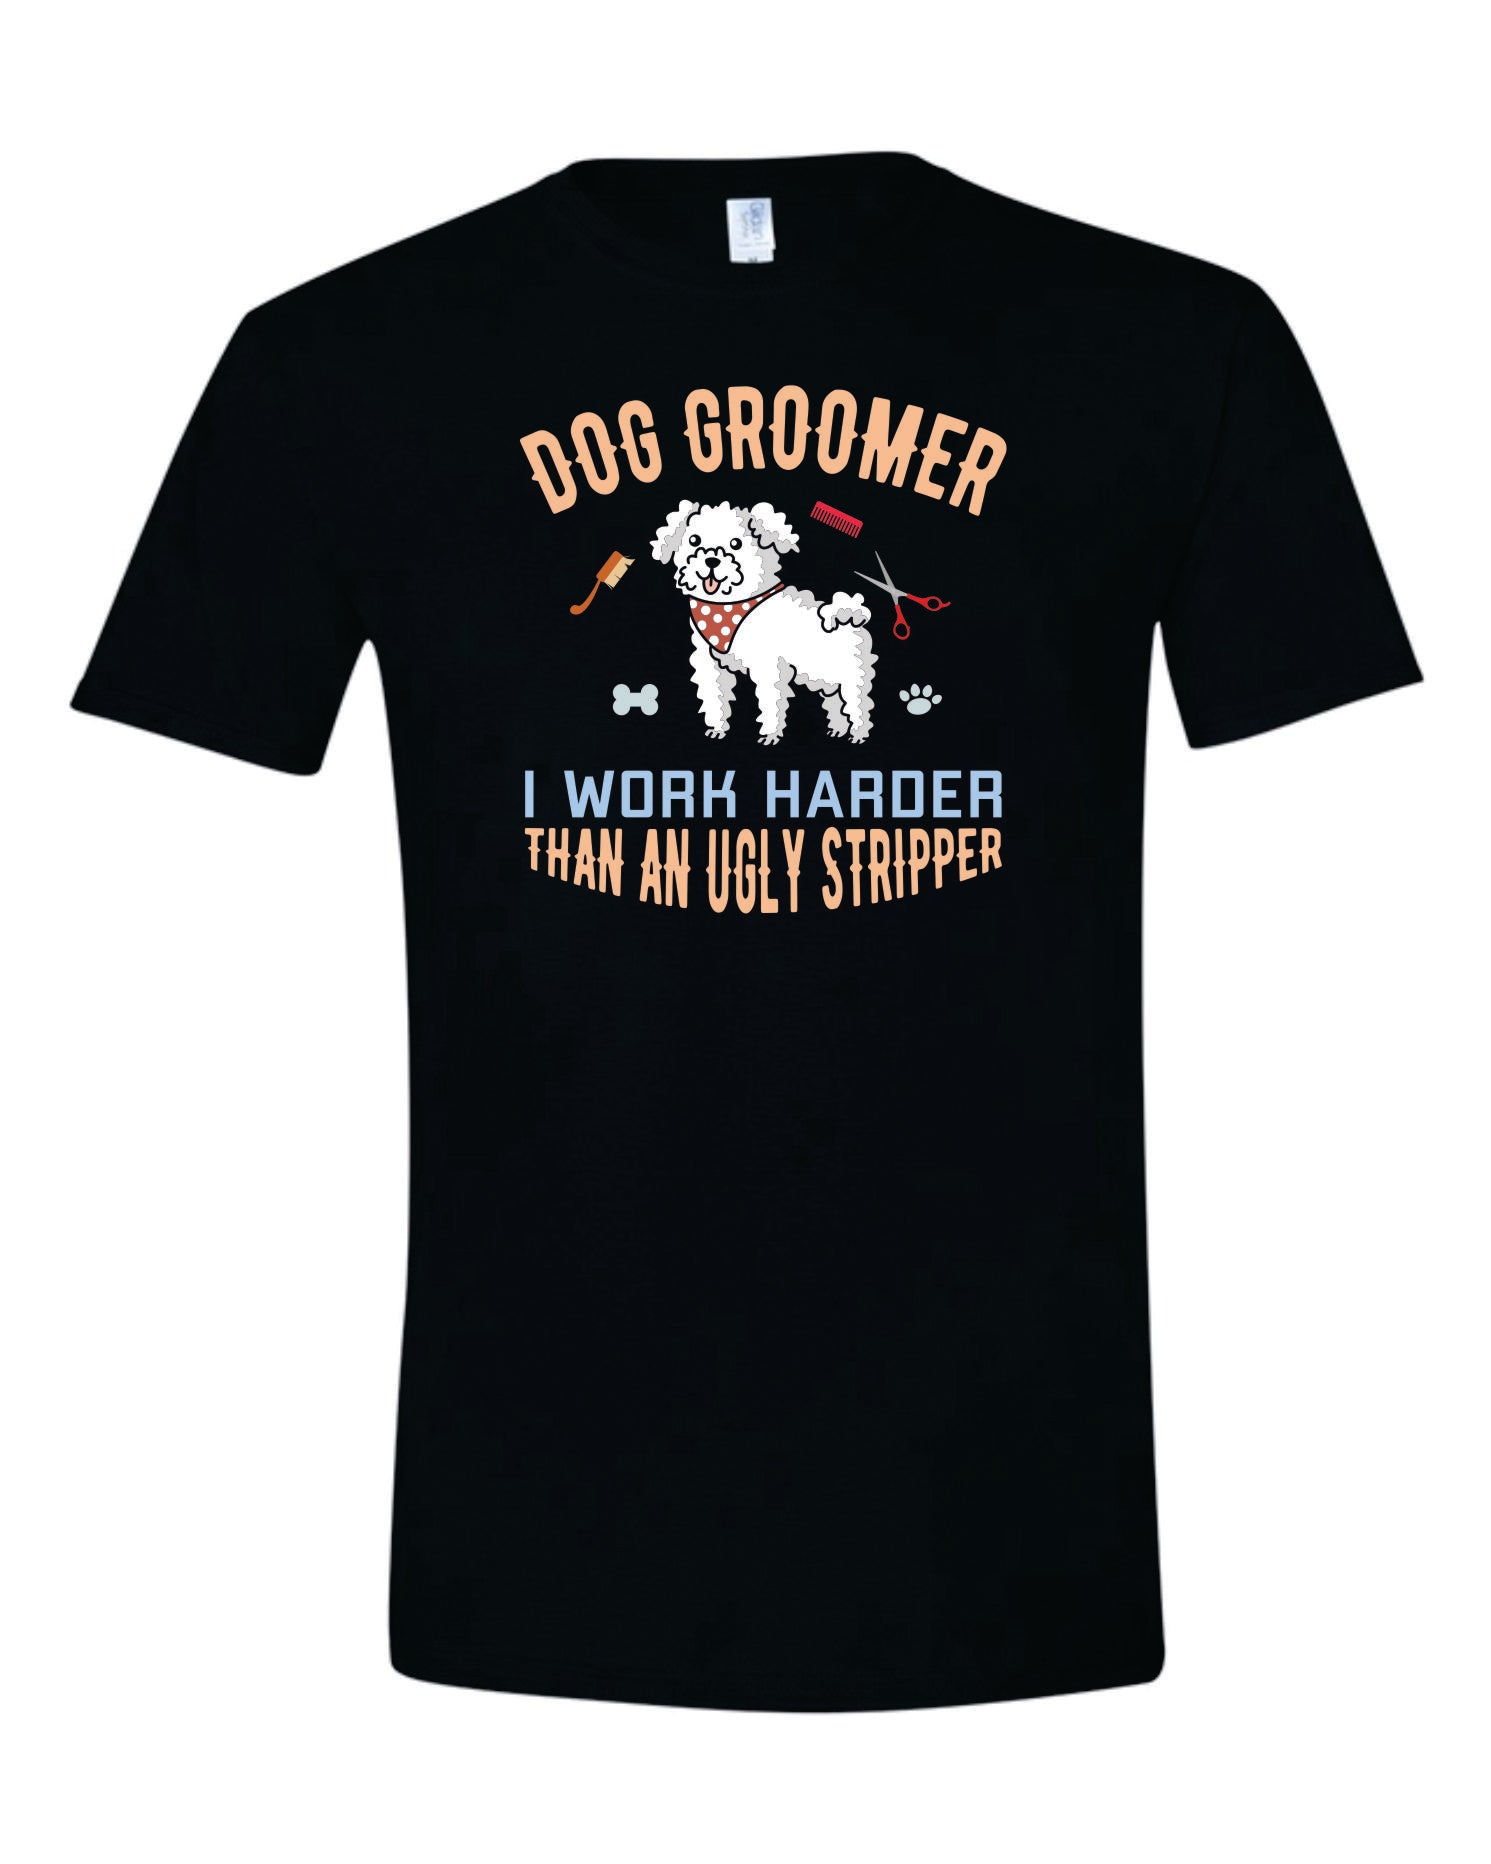 Dog Groomer Works Harder Than an Ugly Stripper - Humorous T-Shirt